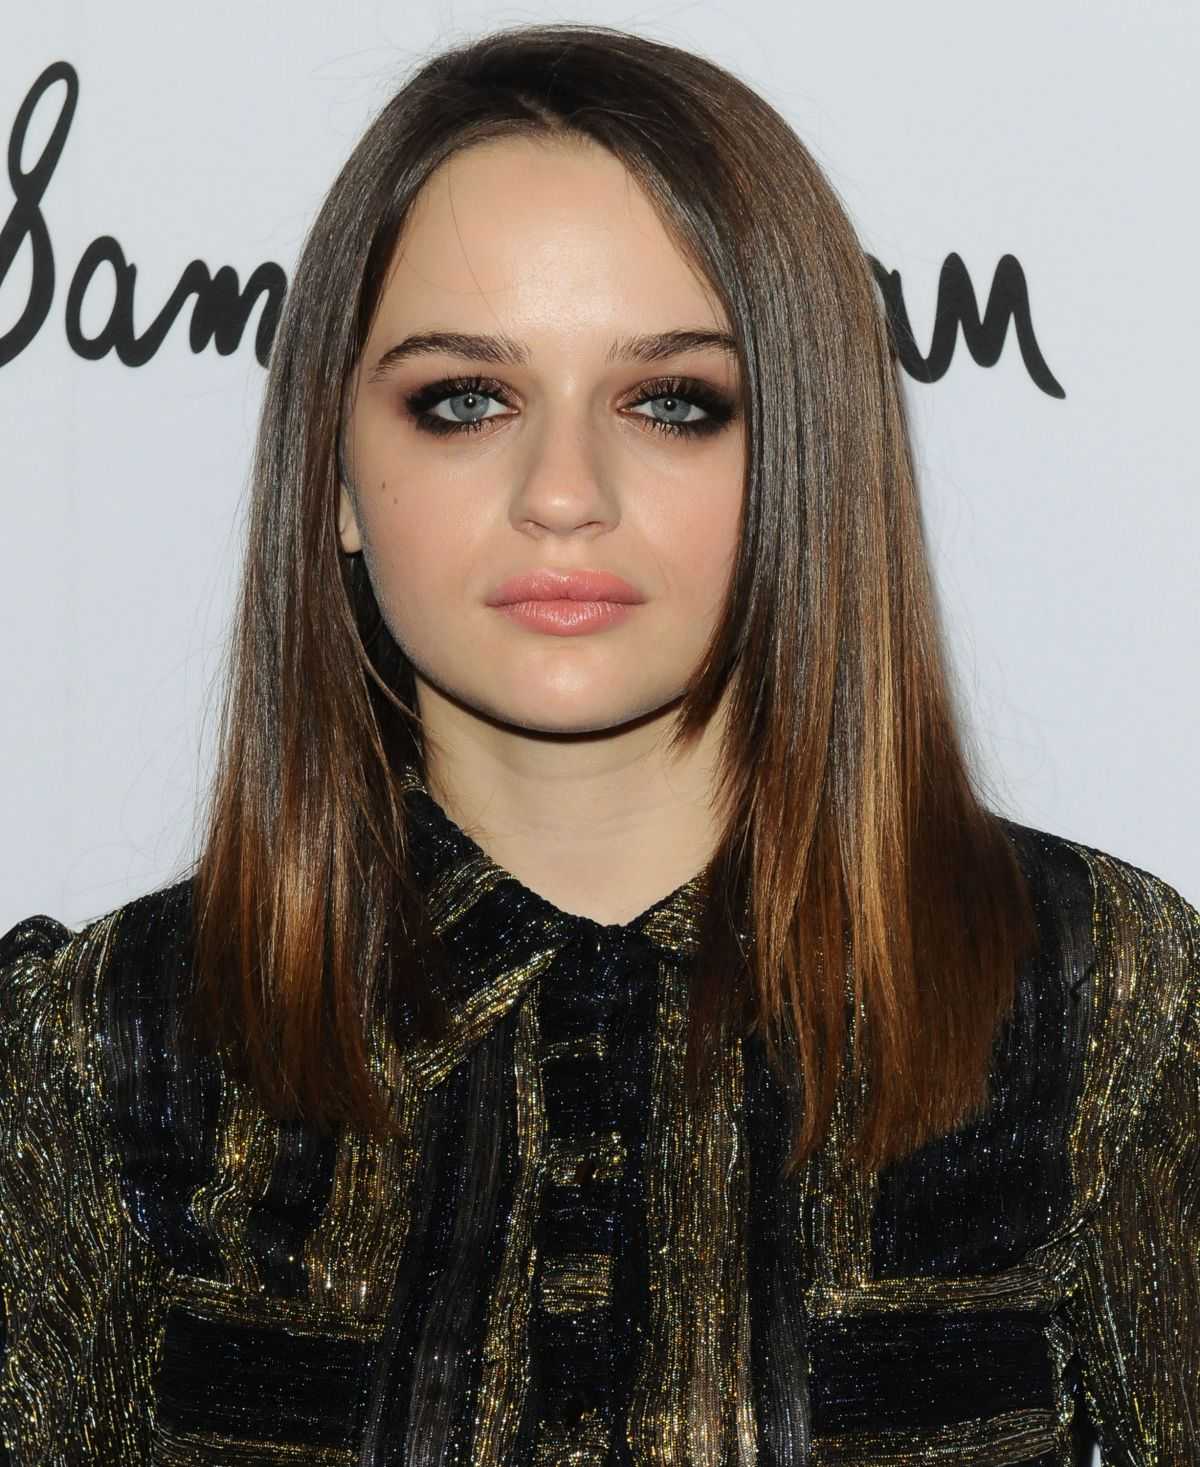 70+ Hot And Sexy Pictures Of Joey King Exposes Her Curvy Body 297